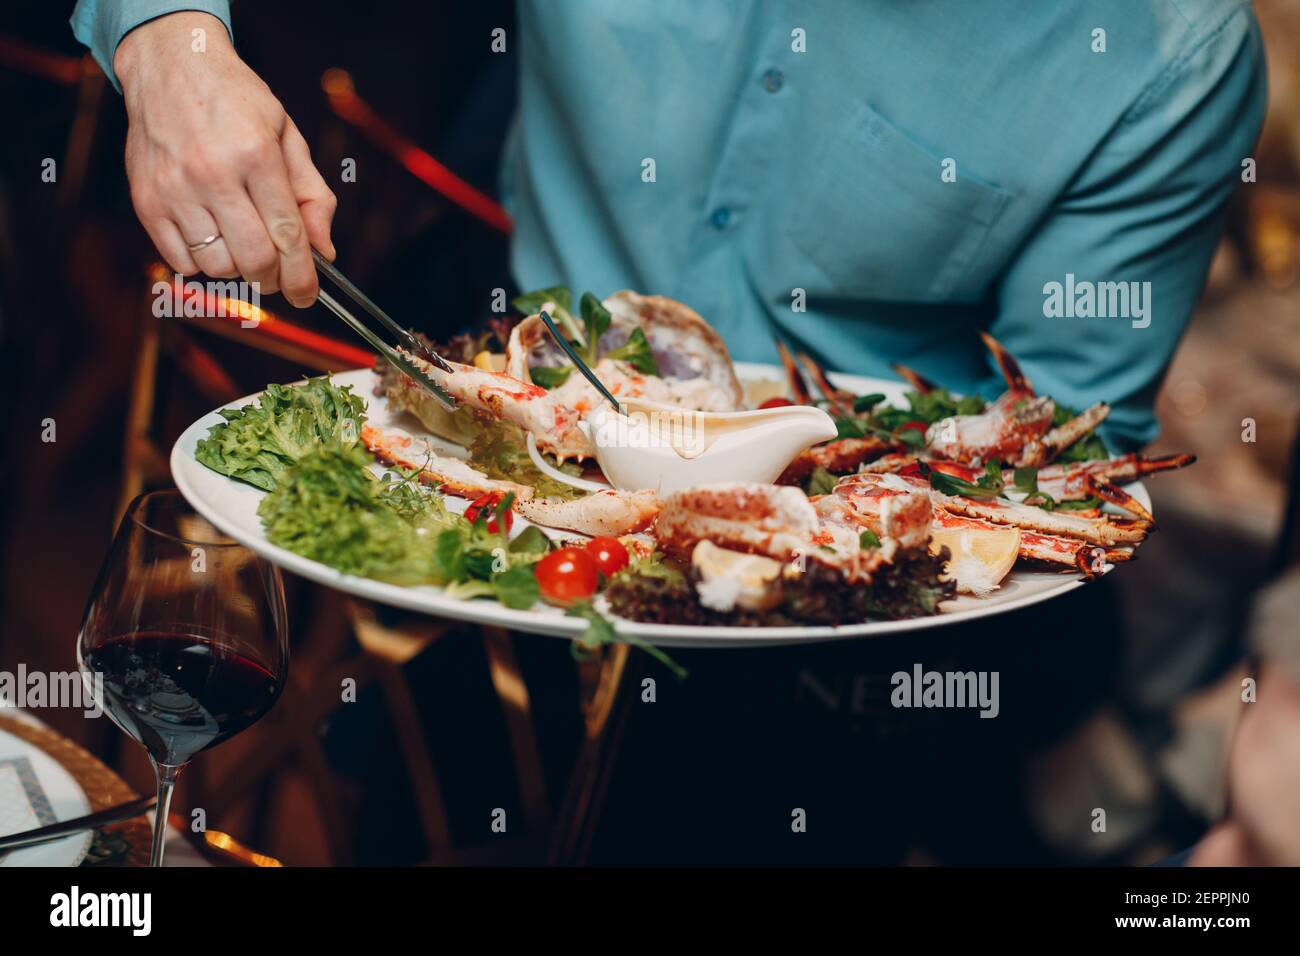 Waiter in a restaurant holds seafood dishes and serves a table catering Concept Healthy food octopus and crabs shellfish. Stock Photo